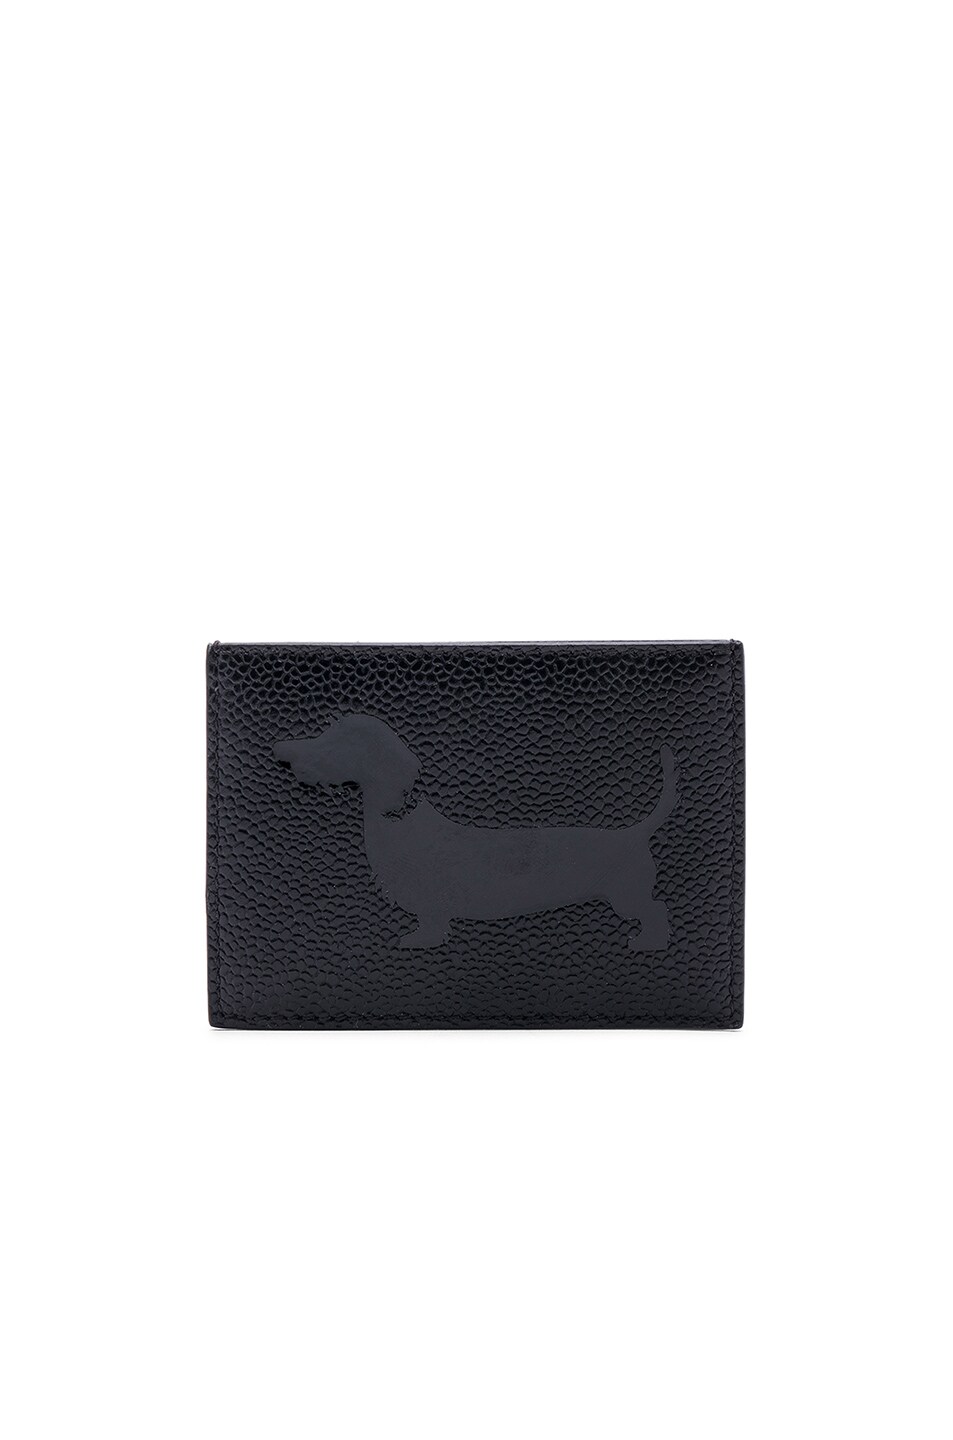 Image 1 of Thom Browne Pebble Grain & Patent Leather Single Card Holder in Black